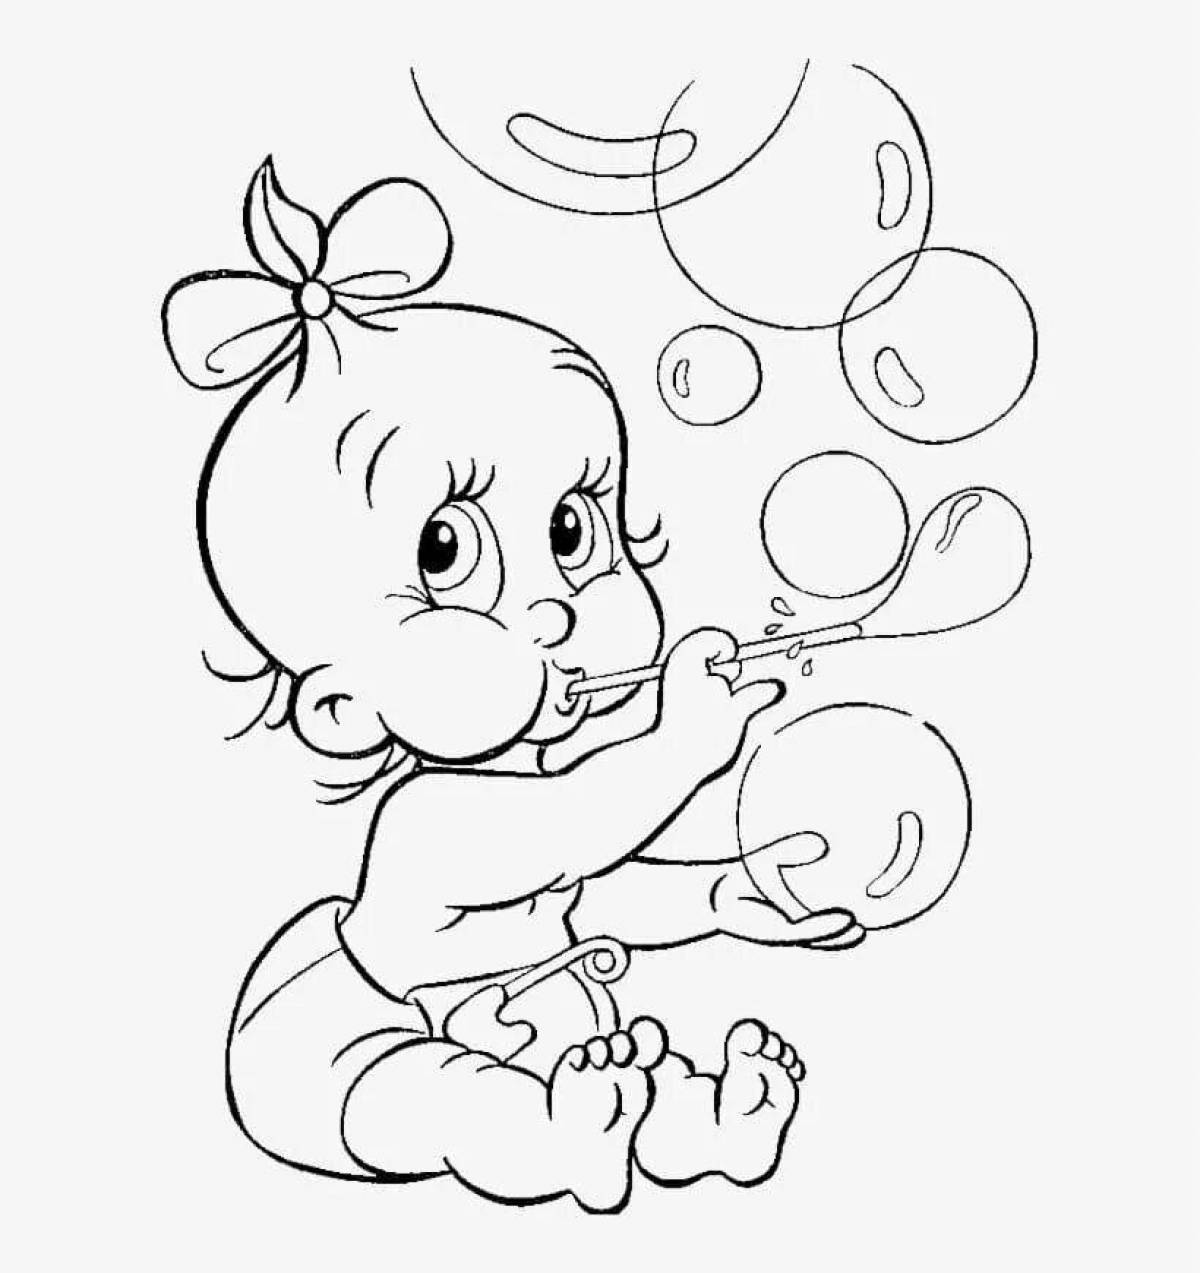 Exquisite coloring book for baby children